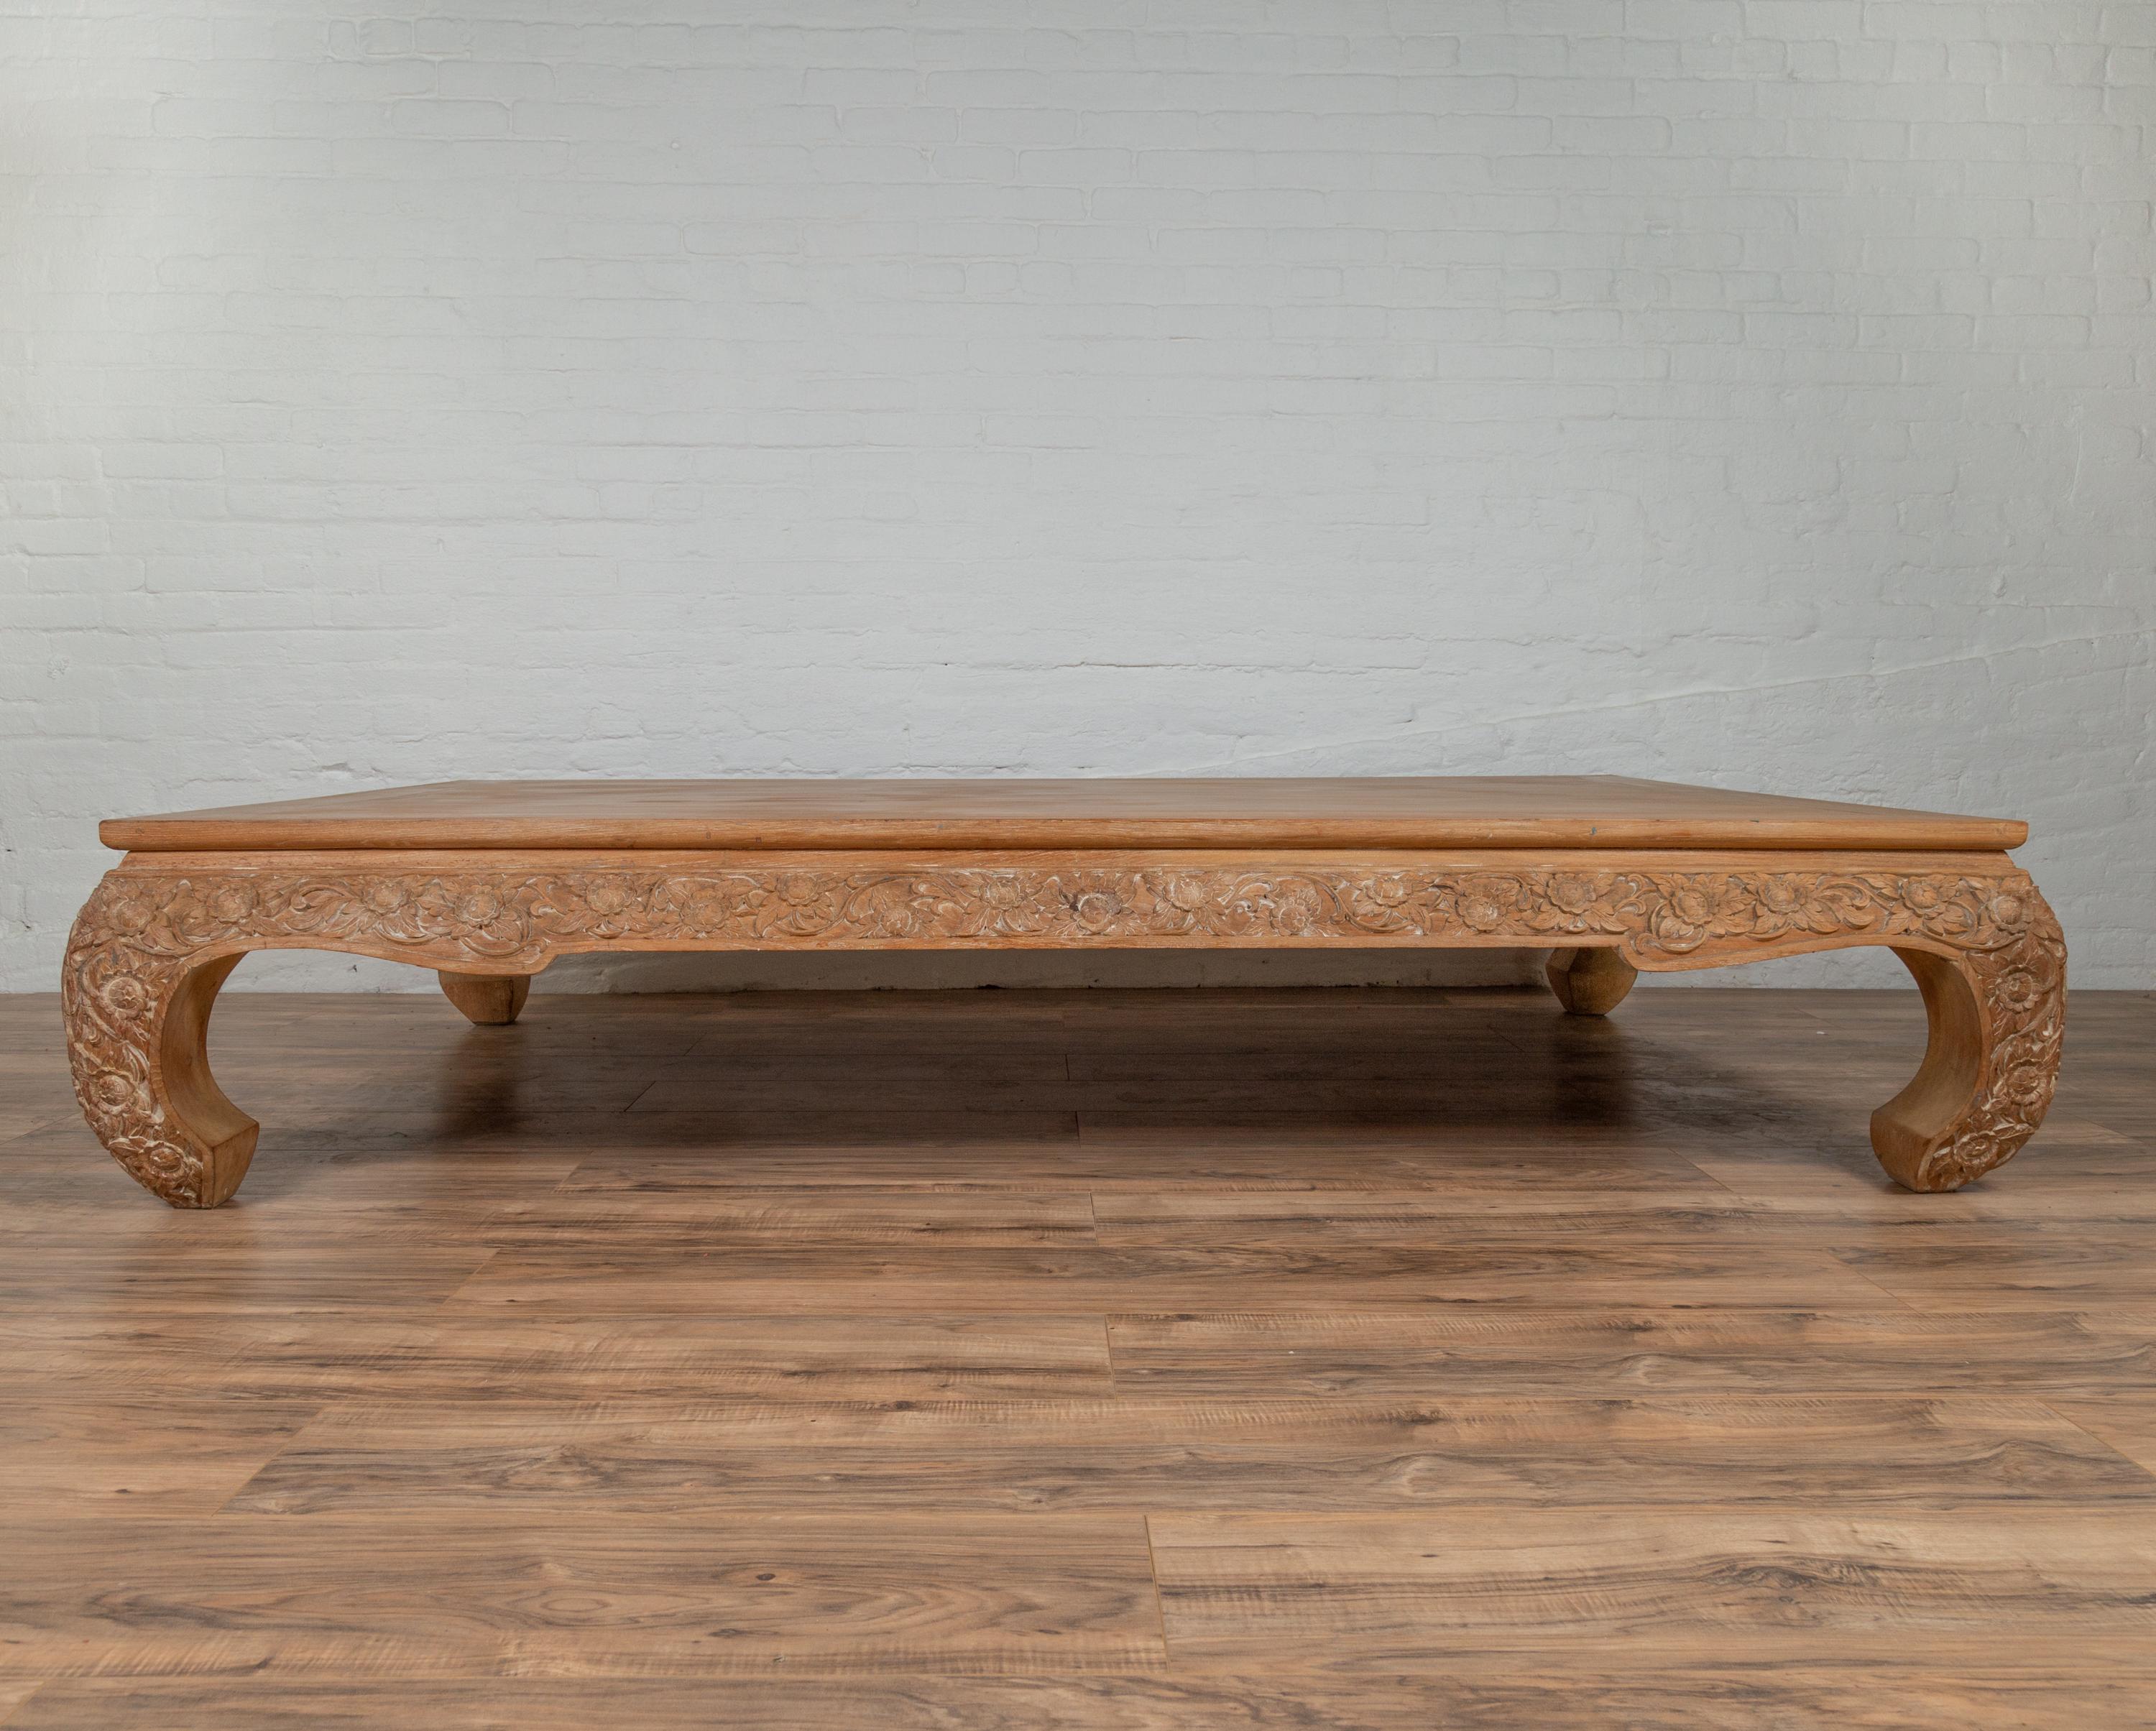 An antique Chinese Ming Dynasty style all natural teak coffee table with hand-carved floral décor and bulging legs. Originally used as a daybed, this Chinese Ming Dynasty style piece features a rectangular planked top sitting above a stunning base.